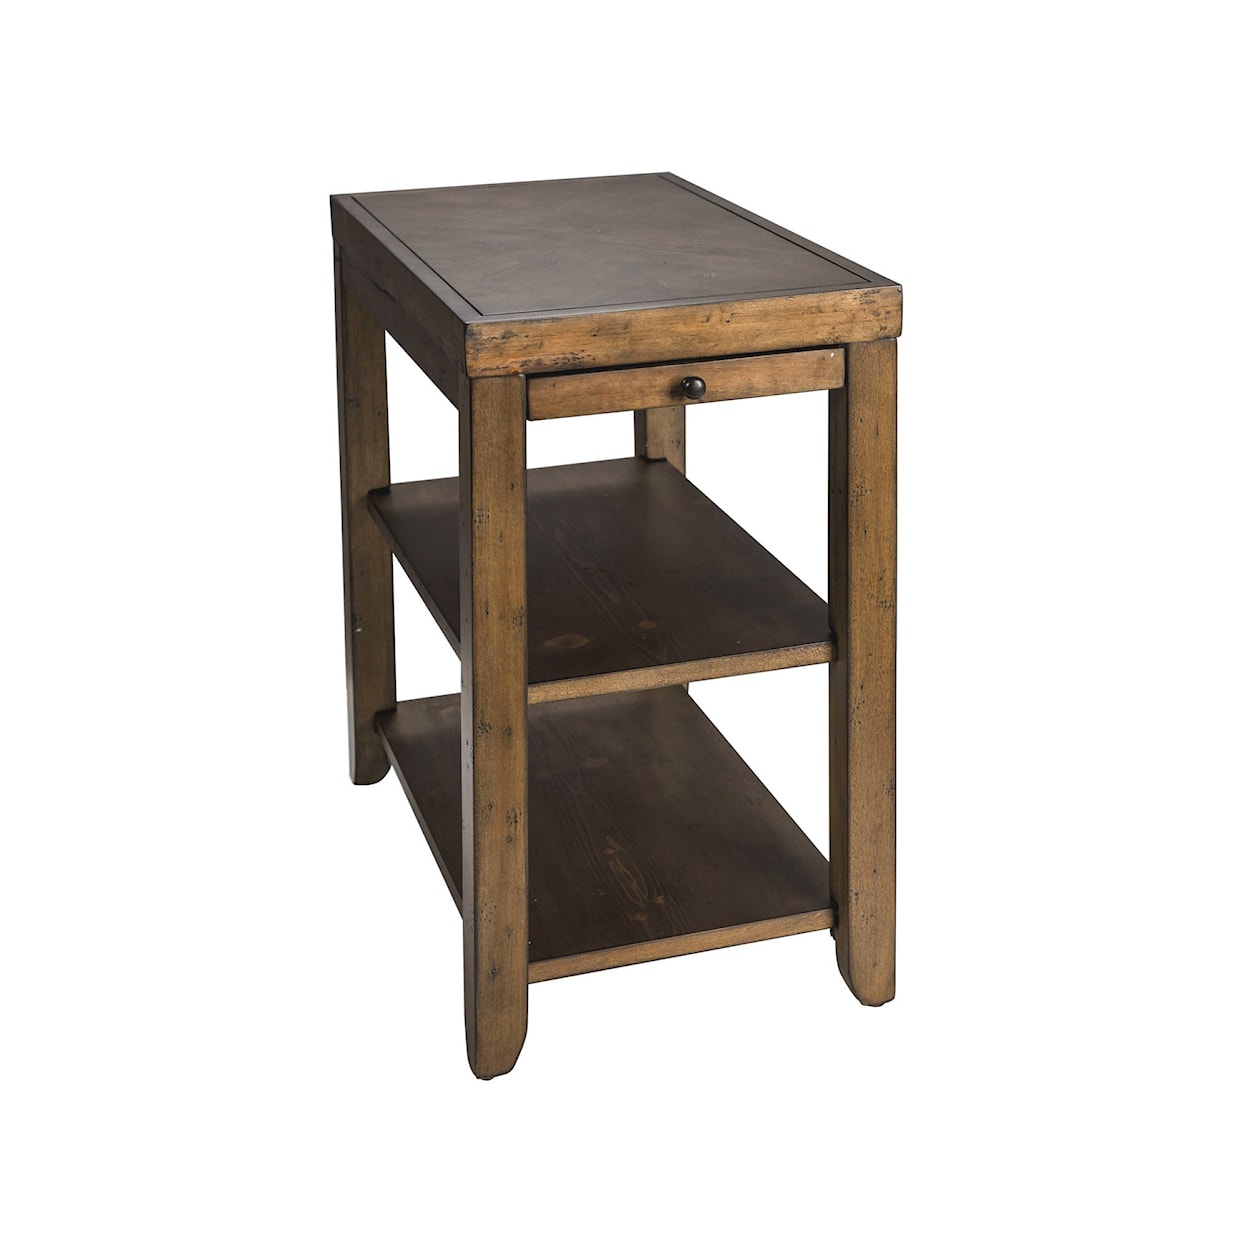 Liberty Furniture Mitchell Occasional 3-Shelf Chairside Table